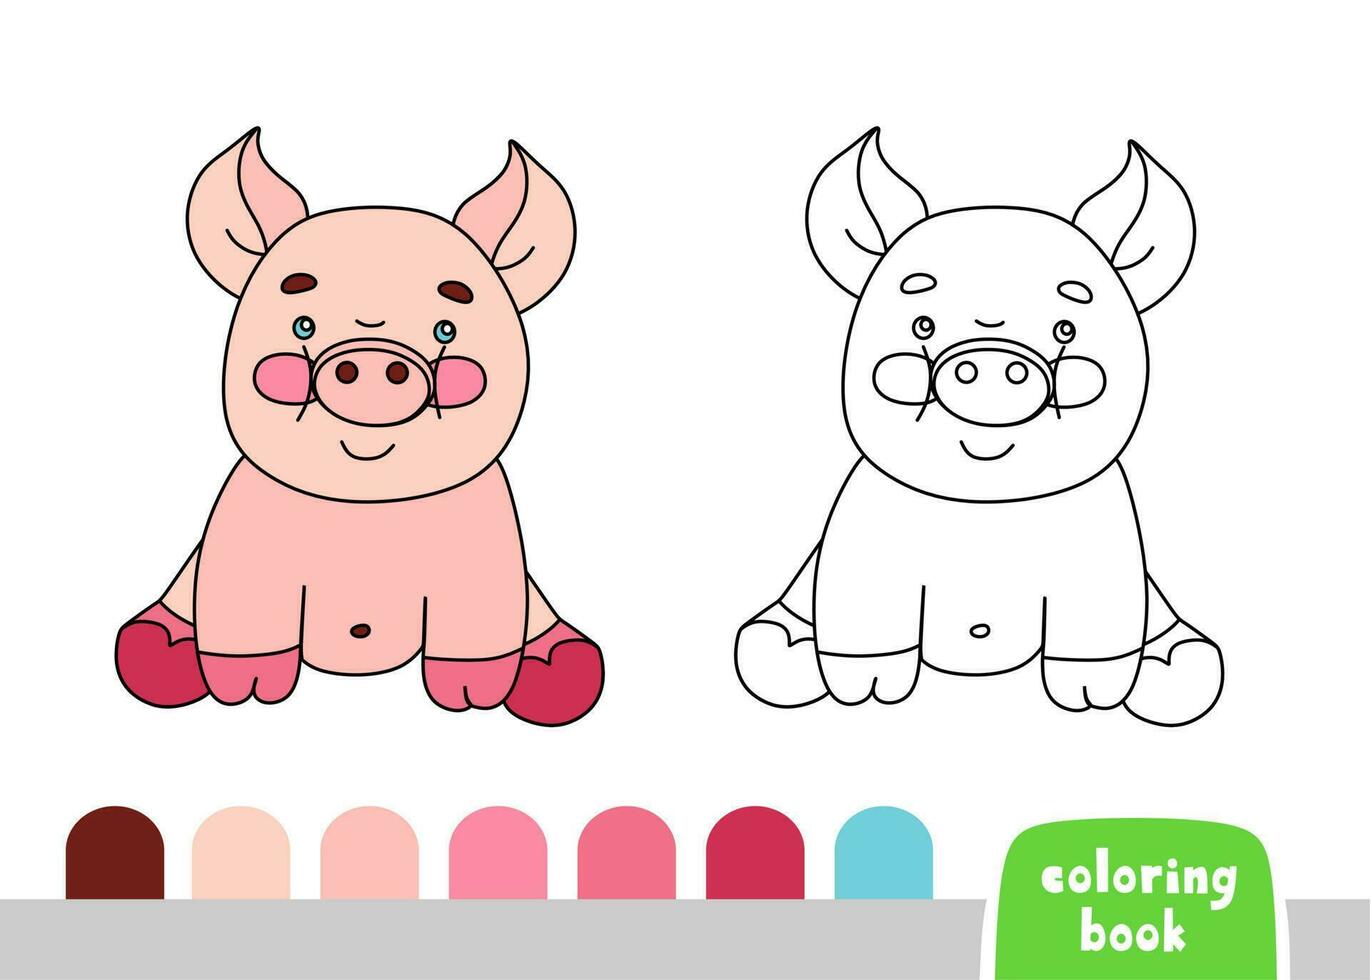 Cute Pig Coloring Book for Kids Page for Books, Magazines, Vector Illustration Doodle Template